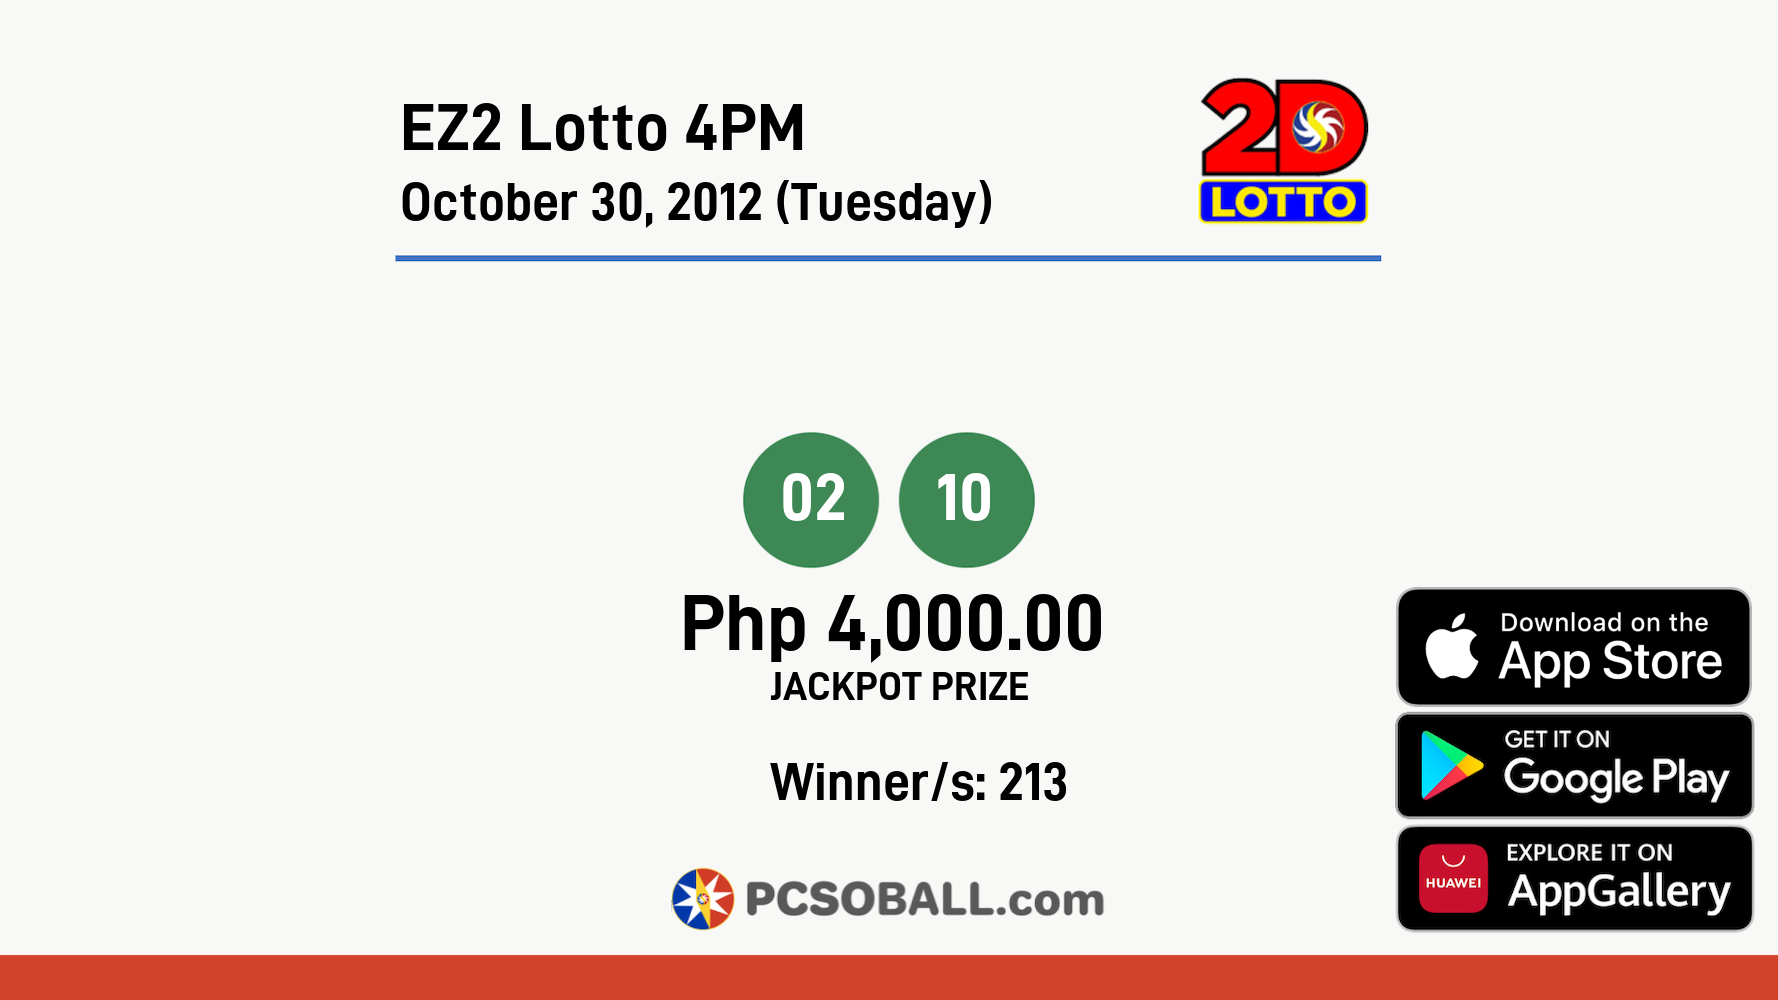 EZ2 Lotto 4PM October 30, 2012 (Tuesday) Result